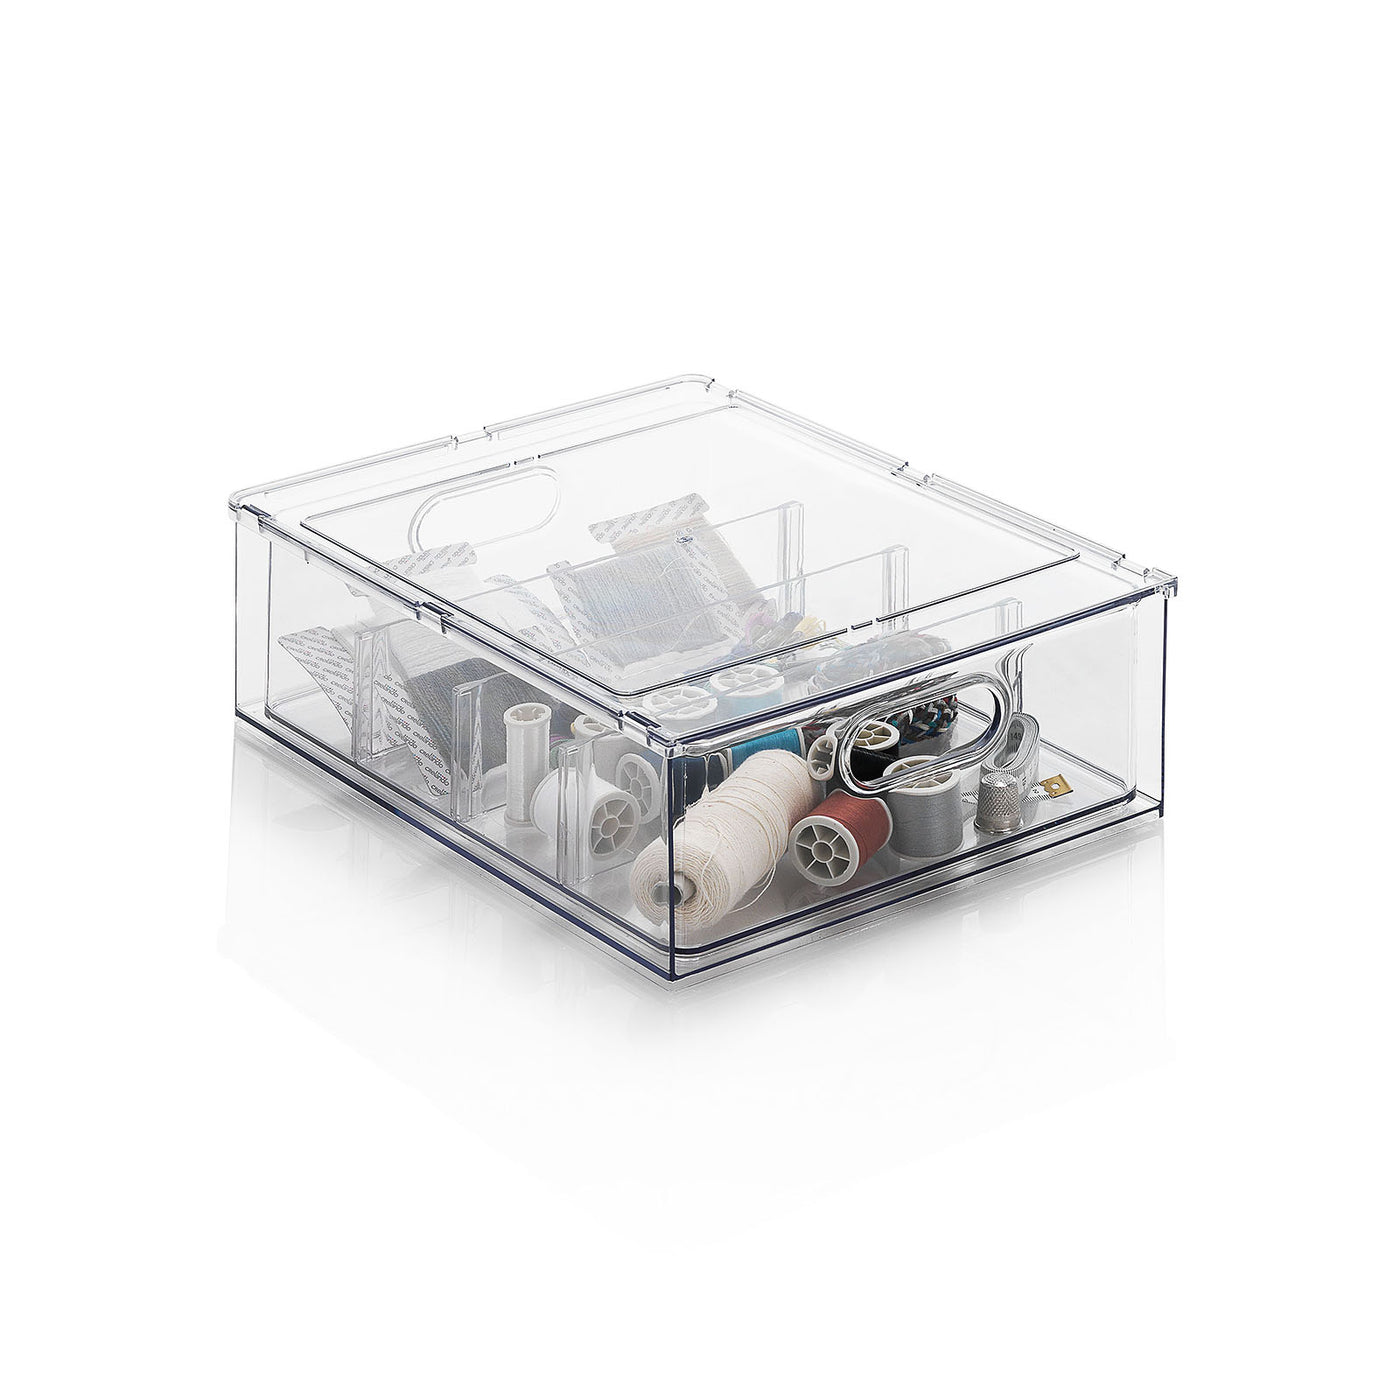 KRAU drawer/container with extractable dividers